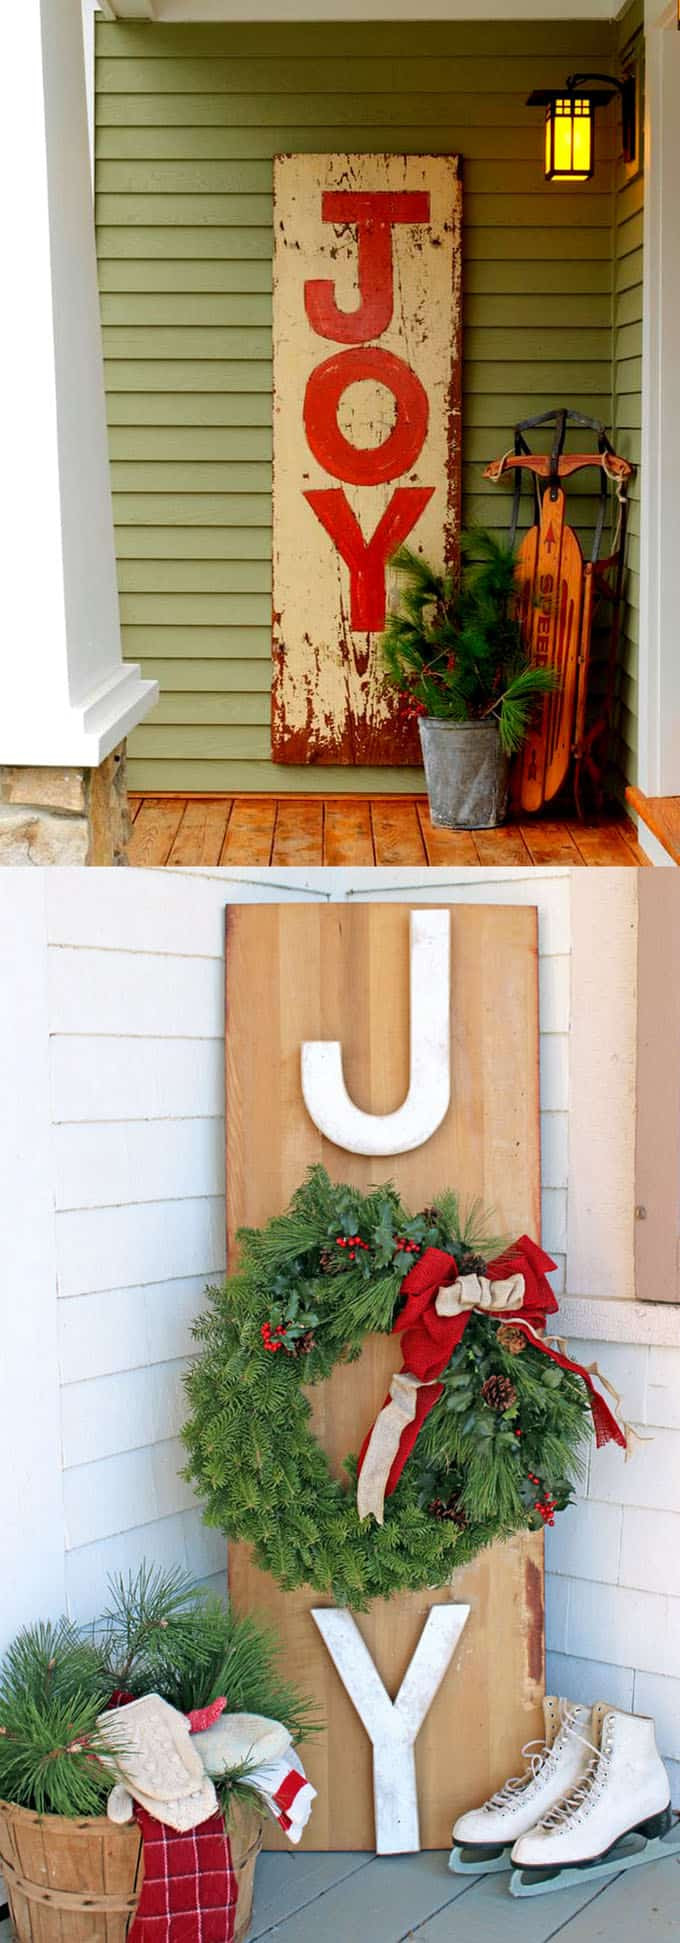 DIY Outdoor Christmas
 Gorgeous Outdoor Christmas Decorations 32 Best Ideas